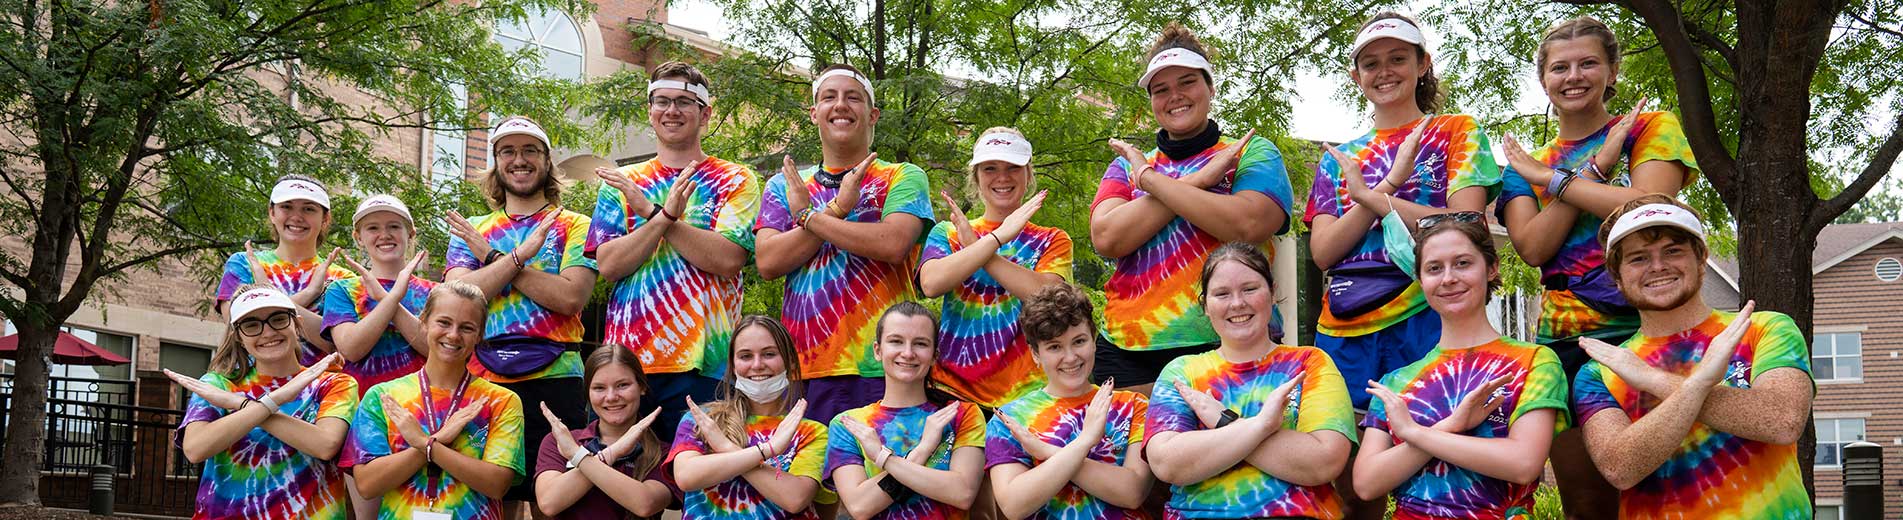 students in tie dye matching t shirts